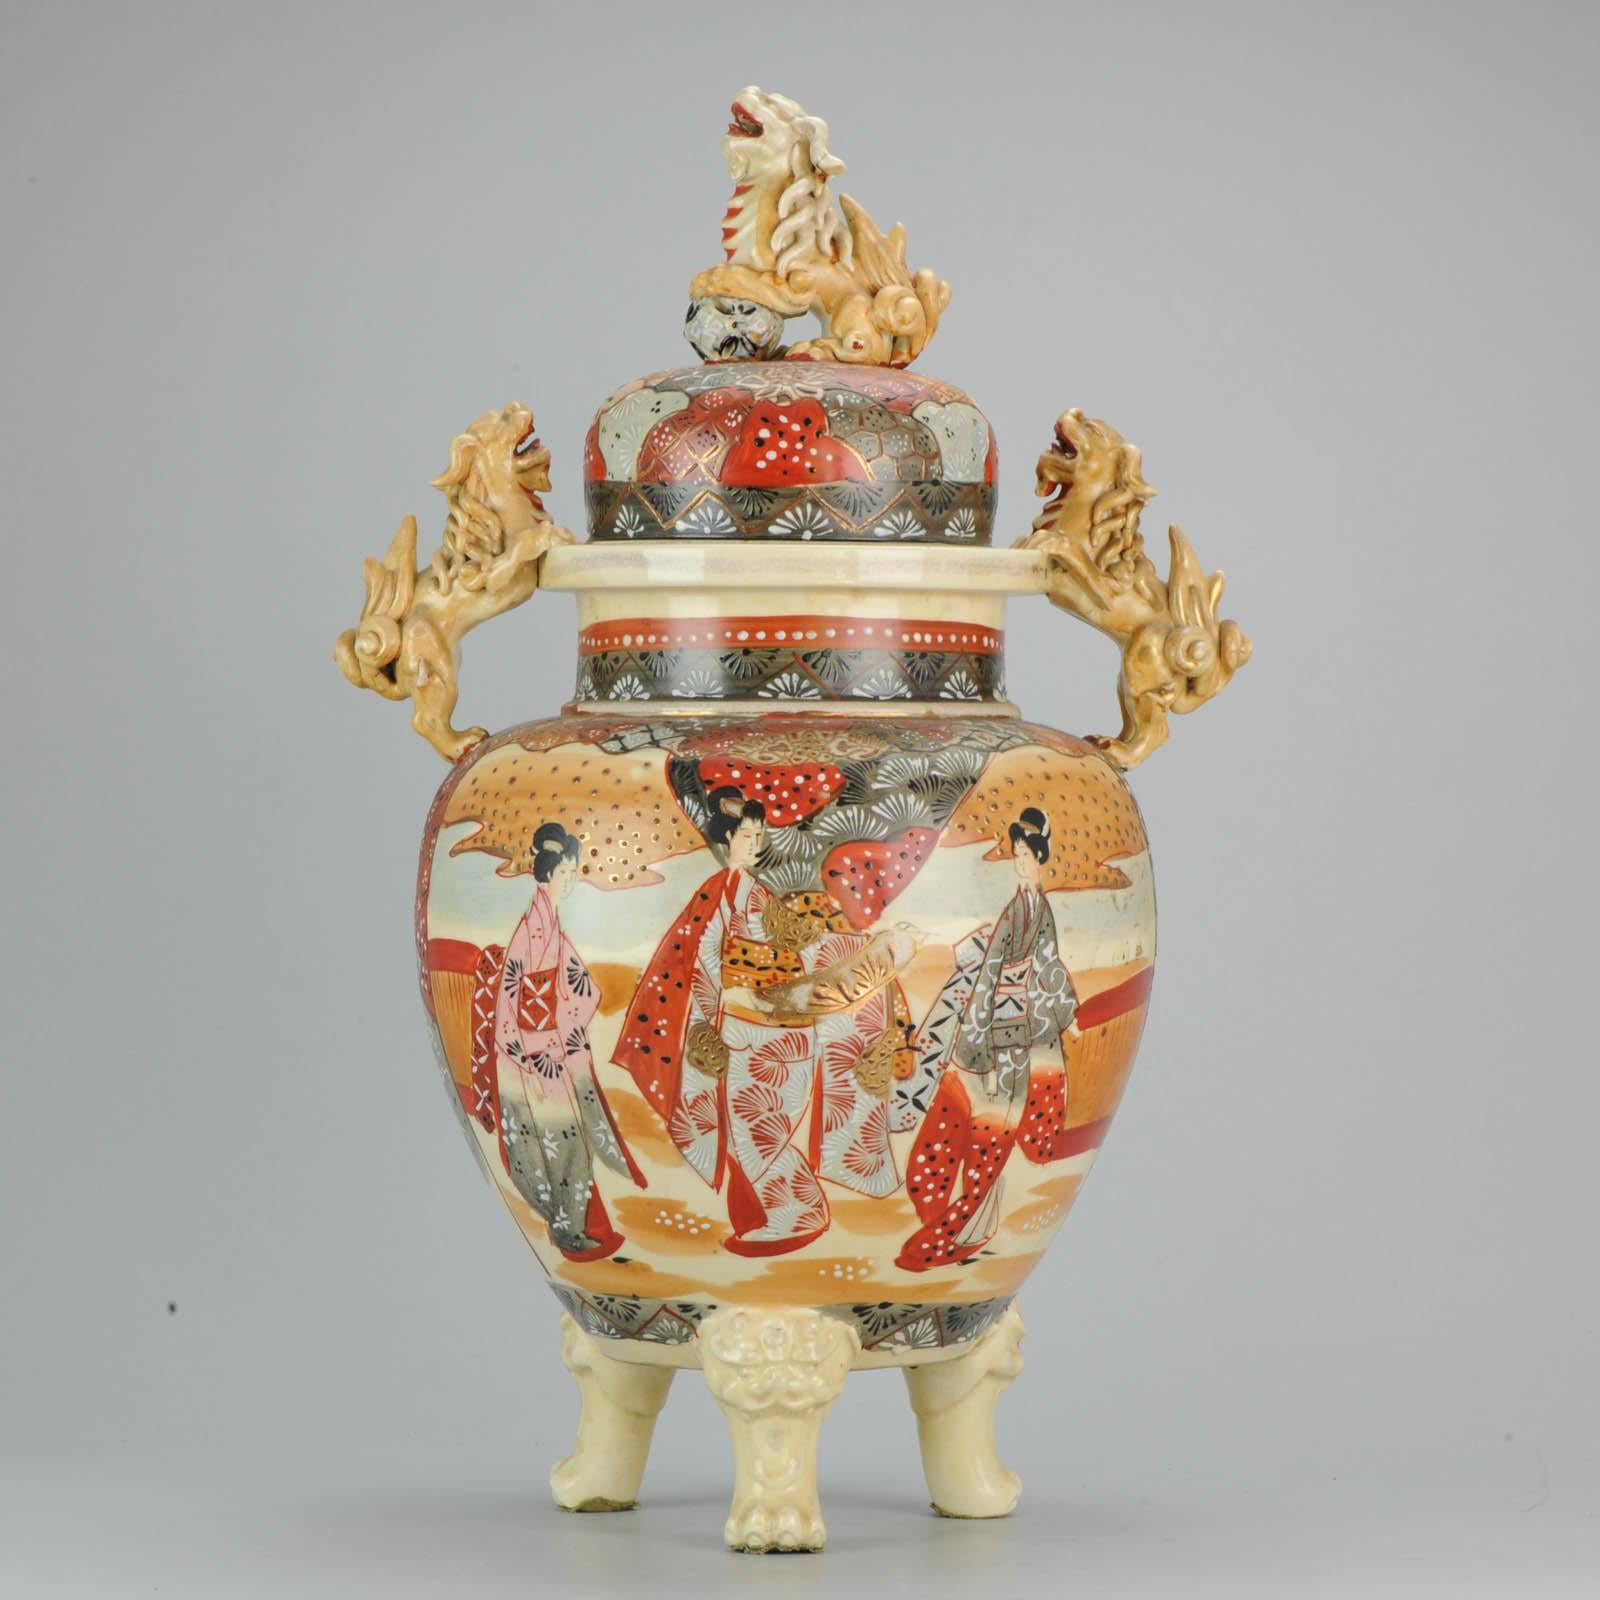 High quality hand painted Satsuma vase/pot with warriors or hunters

During the mid-19th century the well-known highly decorated Satsuma ware was created in an appealing oriental design that became an instant success on the export market while